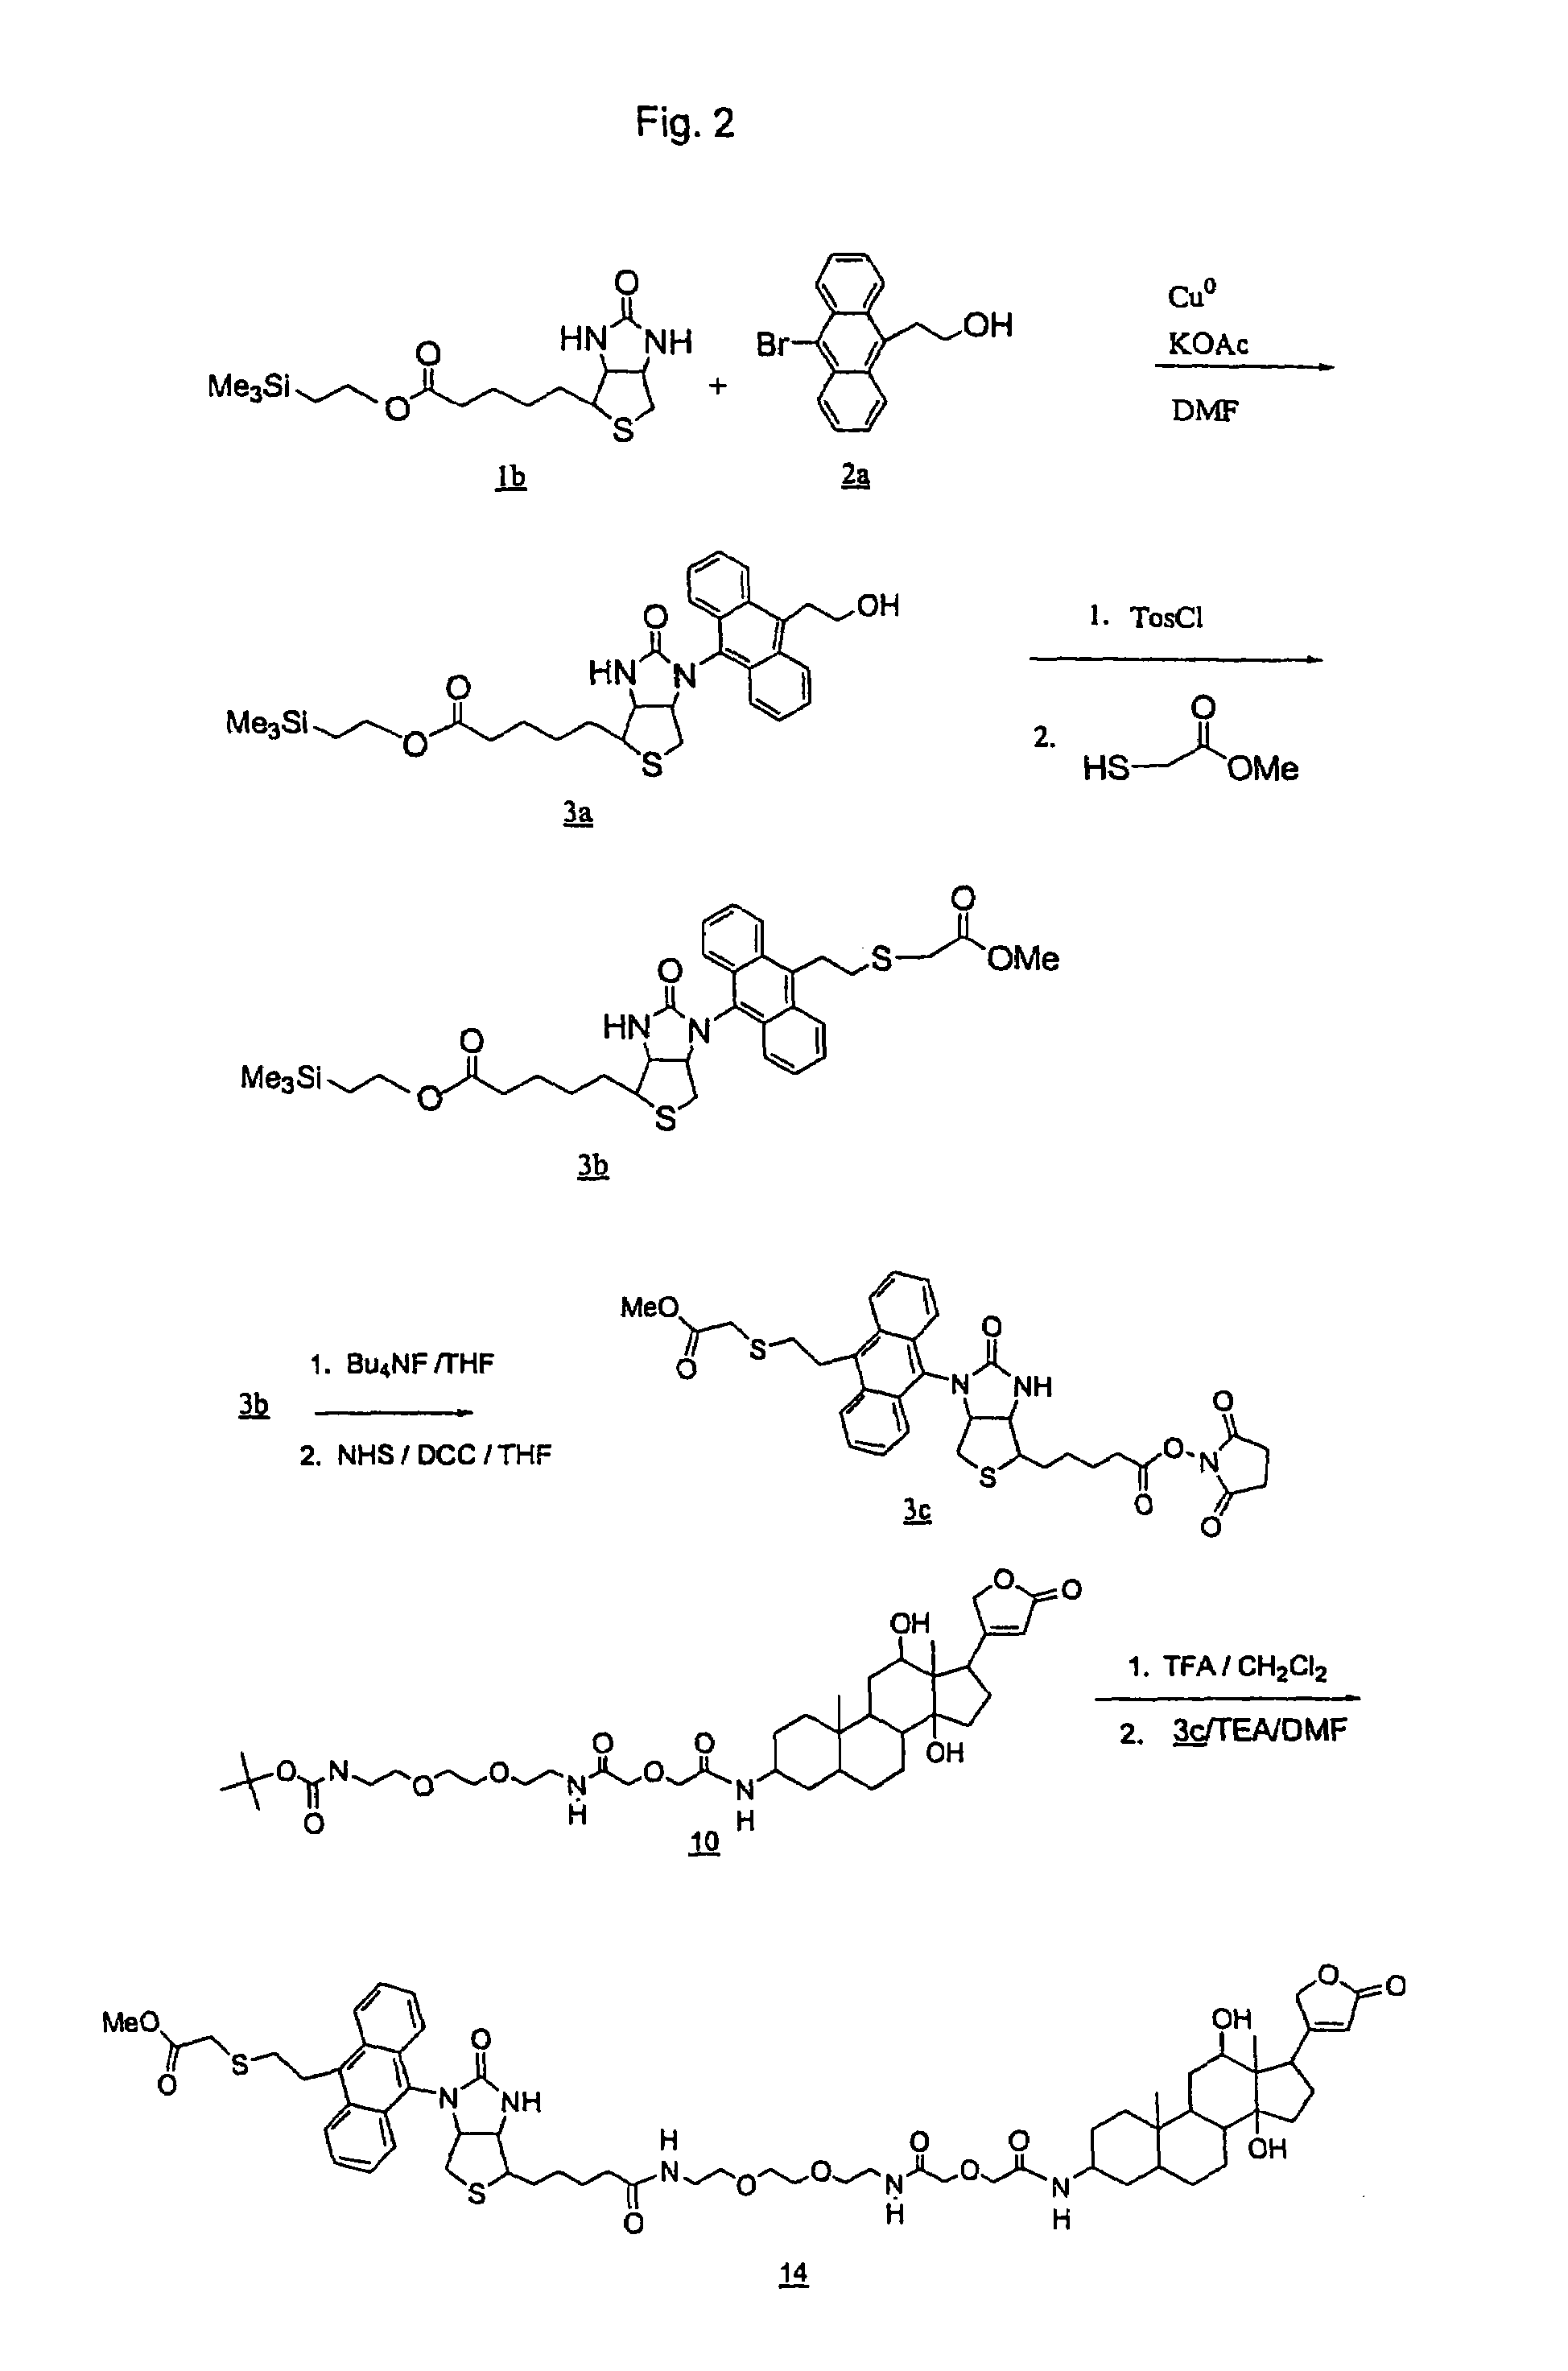 Amplified signal in binding assays